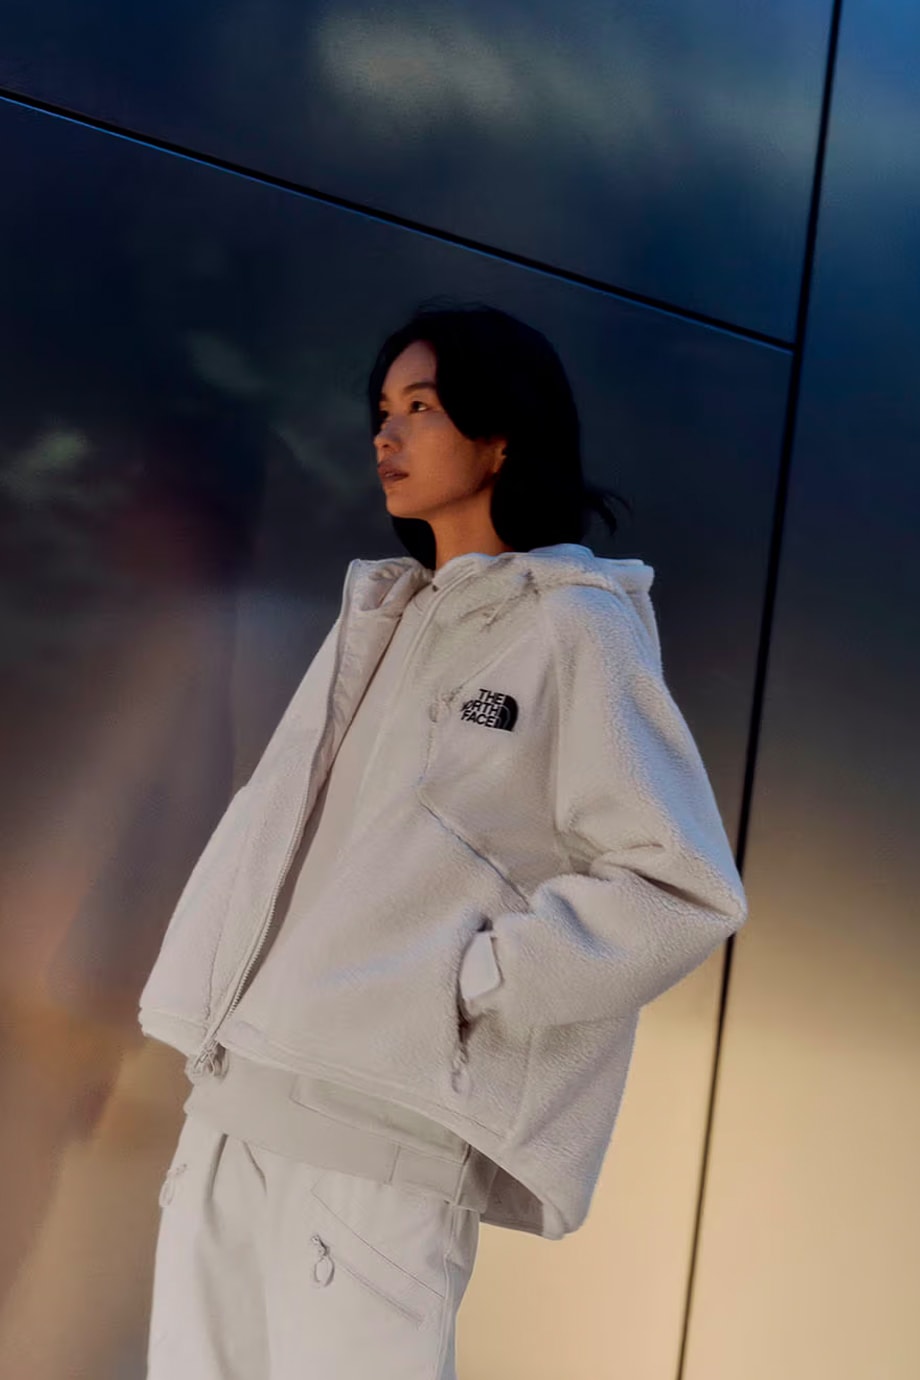 The North Face Urban Exploration Fall Winter 2023 Patch Up Capsule Collection Release Info Date Buy Price Lookbook RE:EXPLORATION